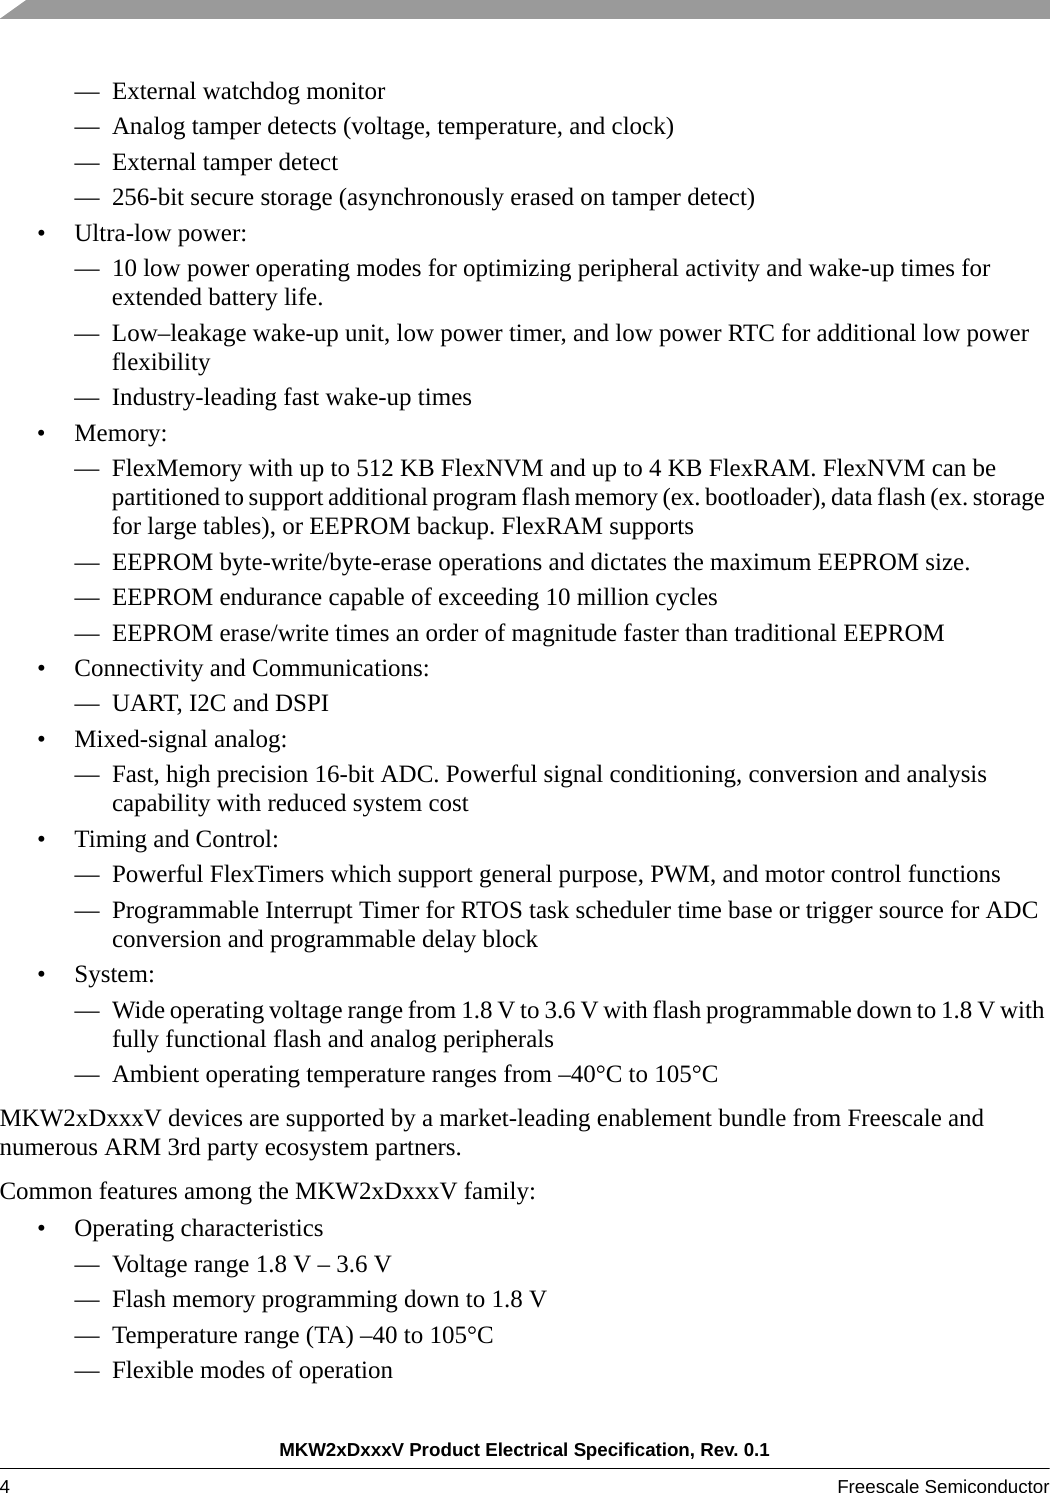 MKW2xDxxxV Product Electrical Specification, Rev. 0.14Freescale Semiconductor — External watchdog monitor— Analog tamper detects (voltage, temperature, and clock)— External tamper detect— 256-bit secure storage (asynchronously erased on tamper detect)• Ultra-low power:— 10 low power operating modes for optimizing peripheral activity and wake-up times for extended battery life.— Low–leakage wake-up unit, low power timer, and low power RTC for additional low power flexibility— Industry-leading fast wake-up times• Memory:— FlexMemory with up to 512 KB FlexNVM and up to 4 KB FlexRAM. FlexNVM can be partitioned to support additional program flash memory (ex. bootloader), data flash (ex. storage for large tables), or EEPROM backup. FlexRAM supports— EEPROM byte-write/byte-erase operations and dictates the maximum EEPROM size.— EEPROM endurance capable of exceeding 10 million cycles— EEPROM erase/write times an order of magnitude faster than traditional EEPROM• Connectivity and Communications:— UART, I2C and DSPI• Mixed-signal analog:— Fast, high precision 16-bit ADC. Powerful signal conditioning, conversion and analysis capability with reduced system cost• Timing and Control:— Powerful FlexTimers which support general purpose, PWM, and motor control functions— Programmable Interrupt Timer for RTOS task scheduler time base or trigger source for ADC conversion and programmable delay block•System:— Wide operating voltage range from 1.8 V to 3.6 V with flash programmable down to 1.8 V with fully functional flash and analog peripherals— Ambient operating temperature ranges from –40°C to 105°CMKW2xDxxxV devices are supported by a market-leading enablement bundle from Freescale and numerous ARM 3rd party ecosystem partners.Common features among the MKW2xDxxxV family:• Operating characteristics— Voltage range 1.8 V – 3.6 V— Flash memory programming down to 1.8 V— Temperature range (TA) –40 to 105°C— Flexible modes of operation